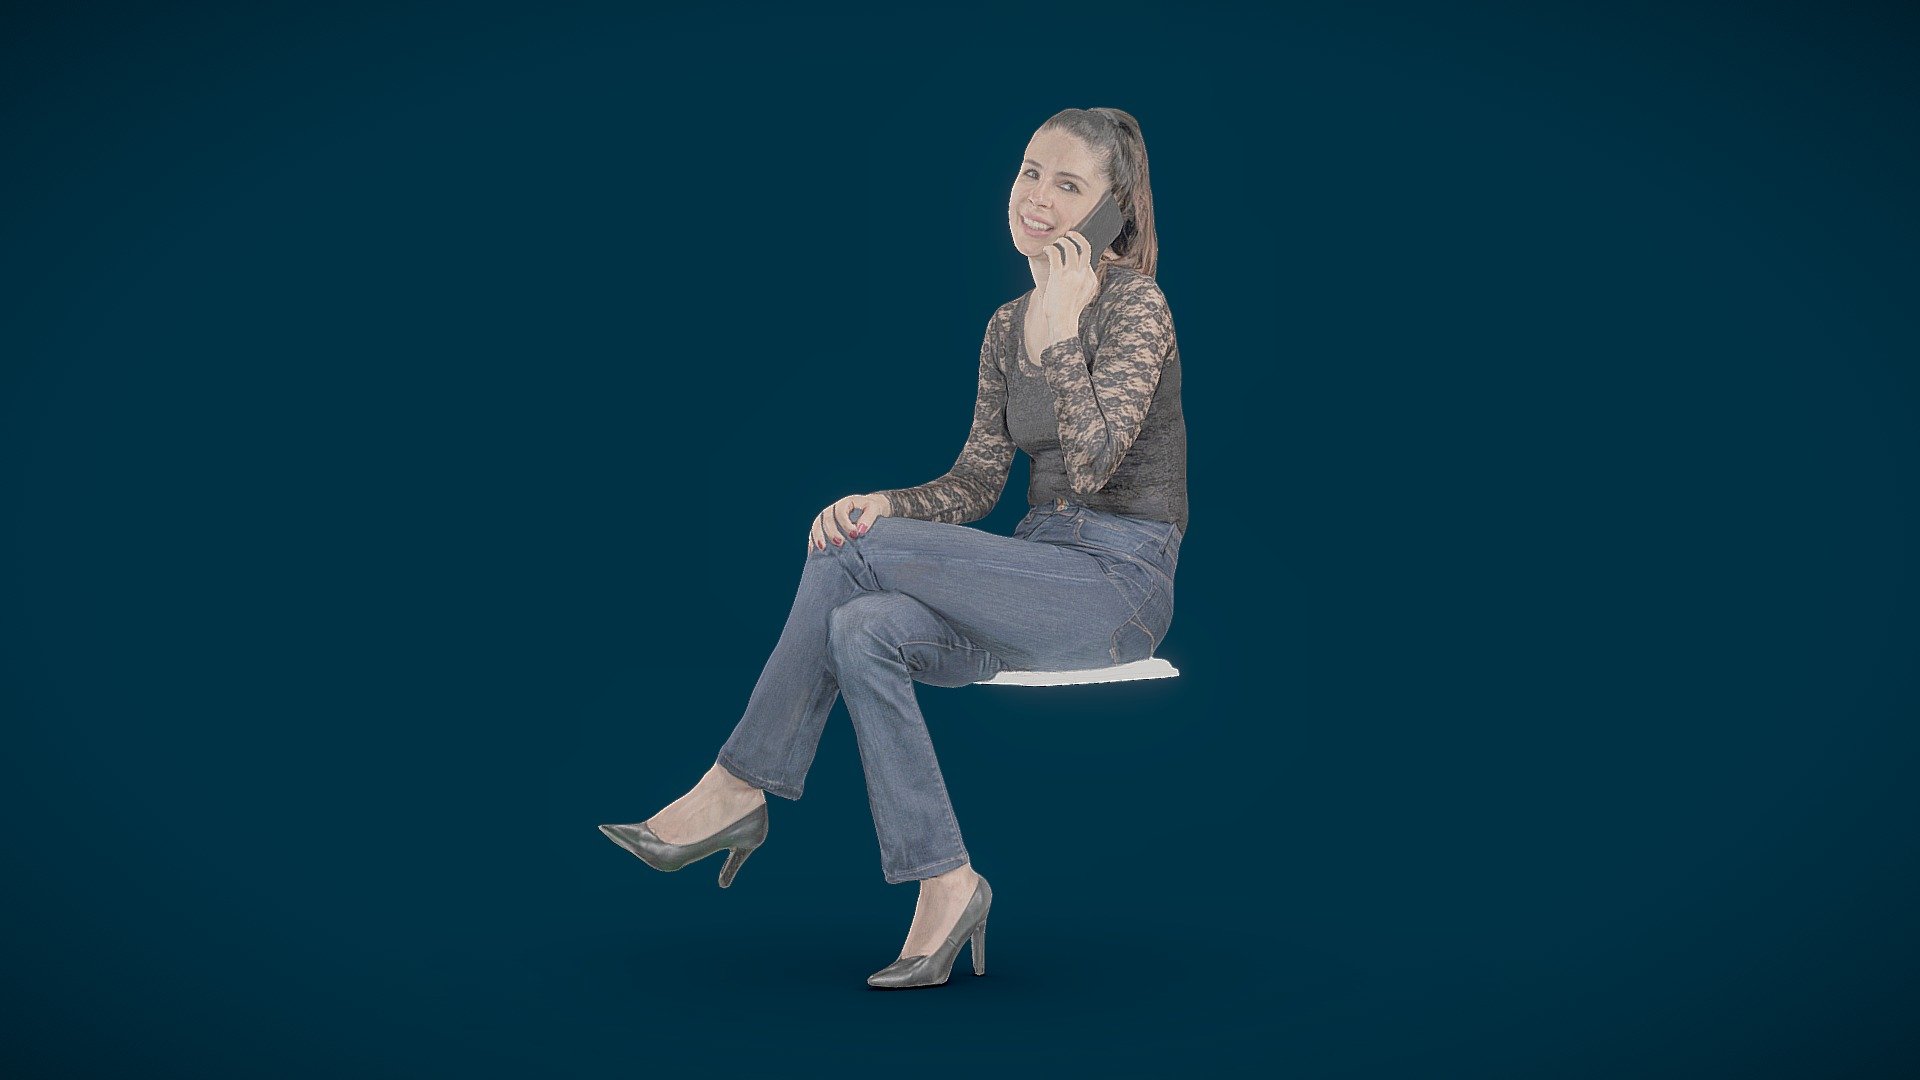 Full body of young elegant caucasian business woman sitting and talking on the phone smiling and looking over her shoulder

Posed photogrammetry scan with with 

8192x8192 8k diffuse map
8192x8192 8k specular map
8192x8192 8k roughness map - Woman sit and smile on the phone - posed 3D scan - 3D model by sharplaninac 3d model